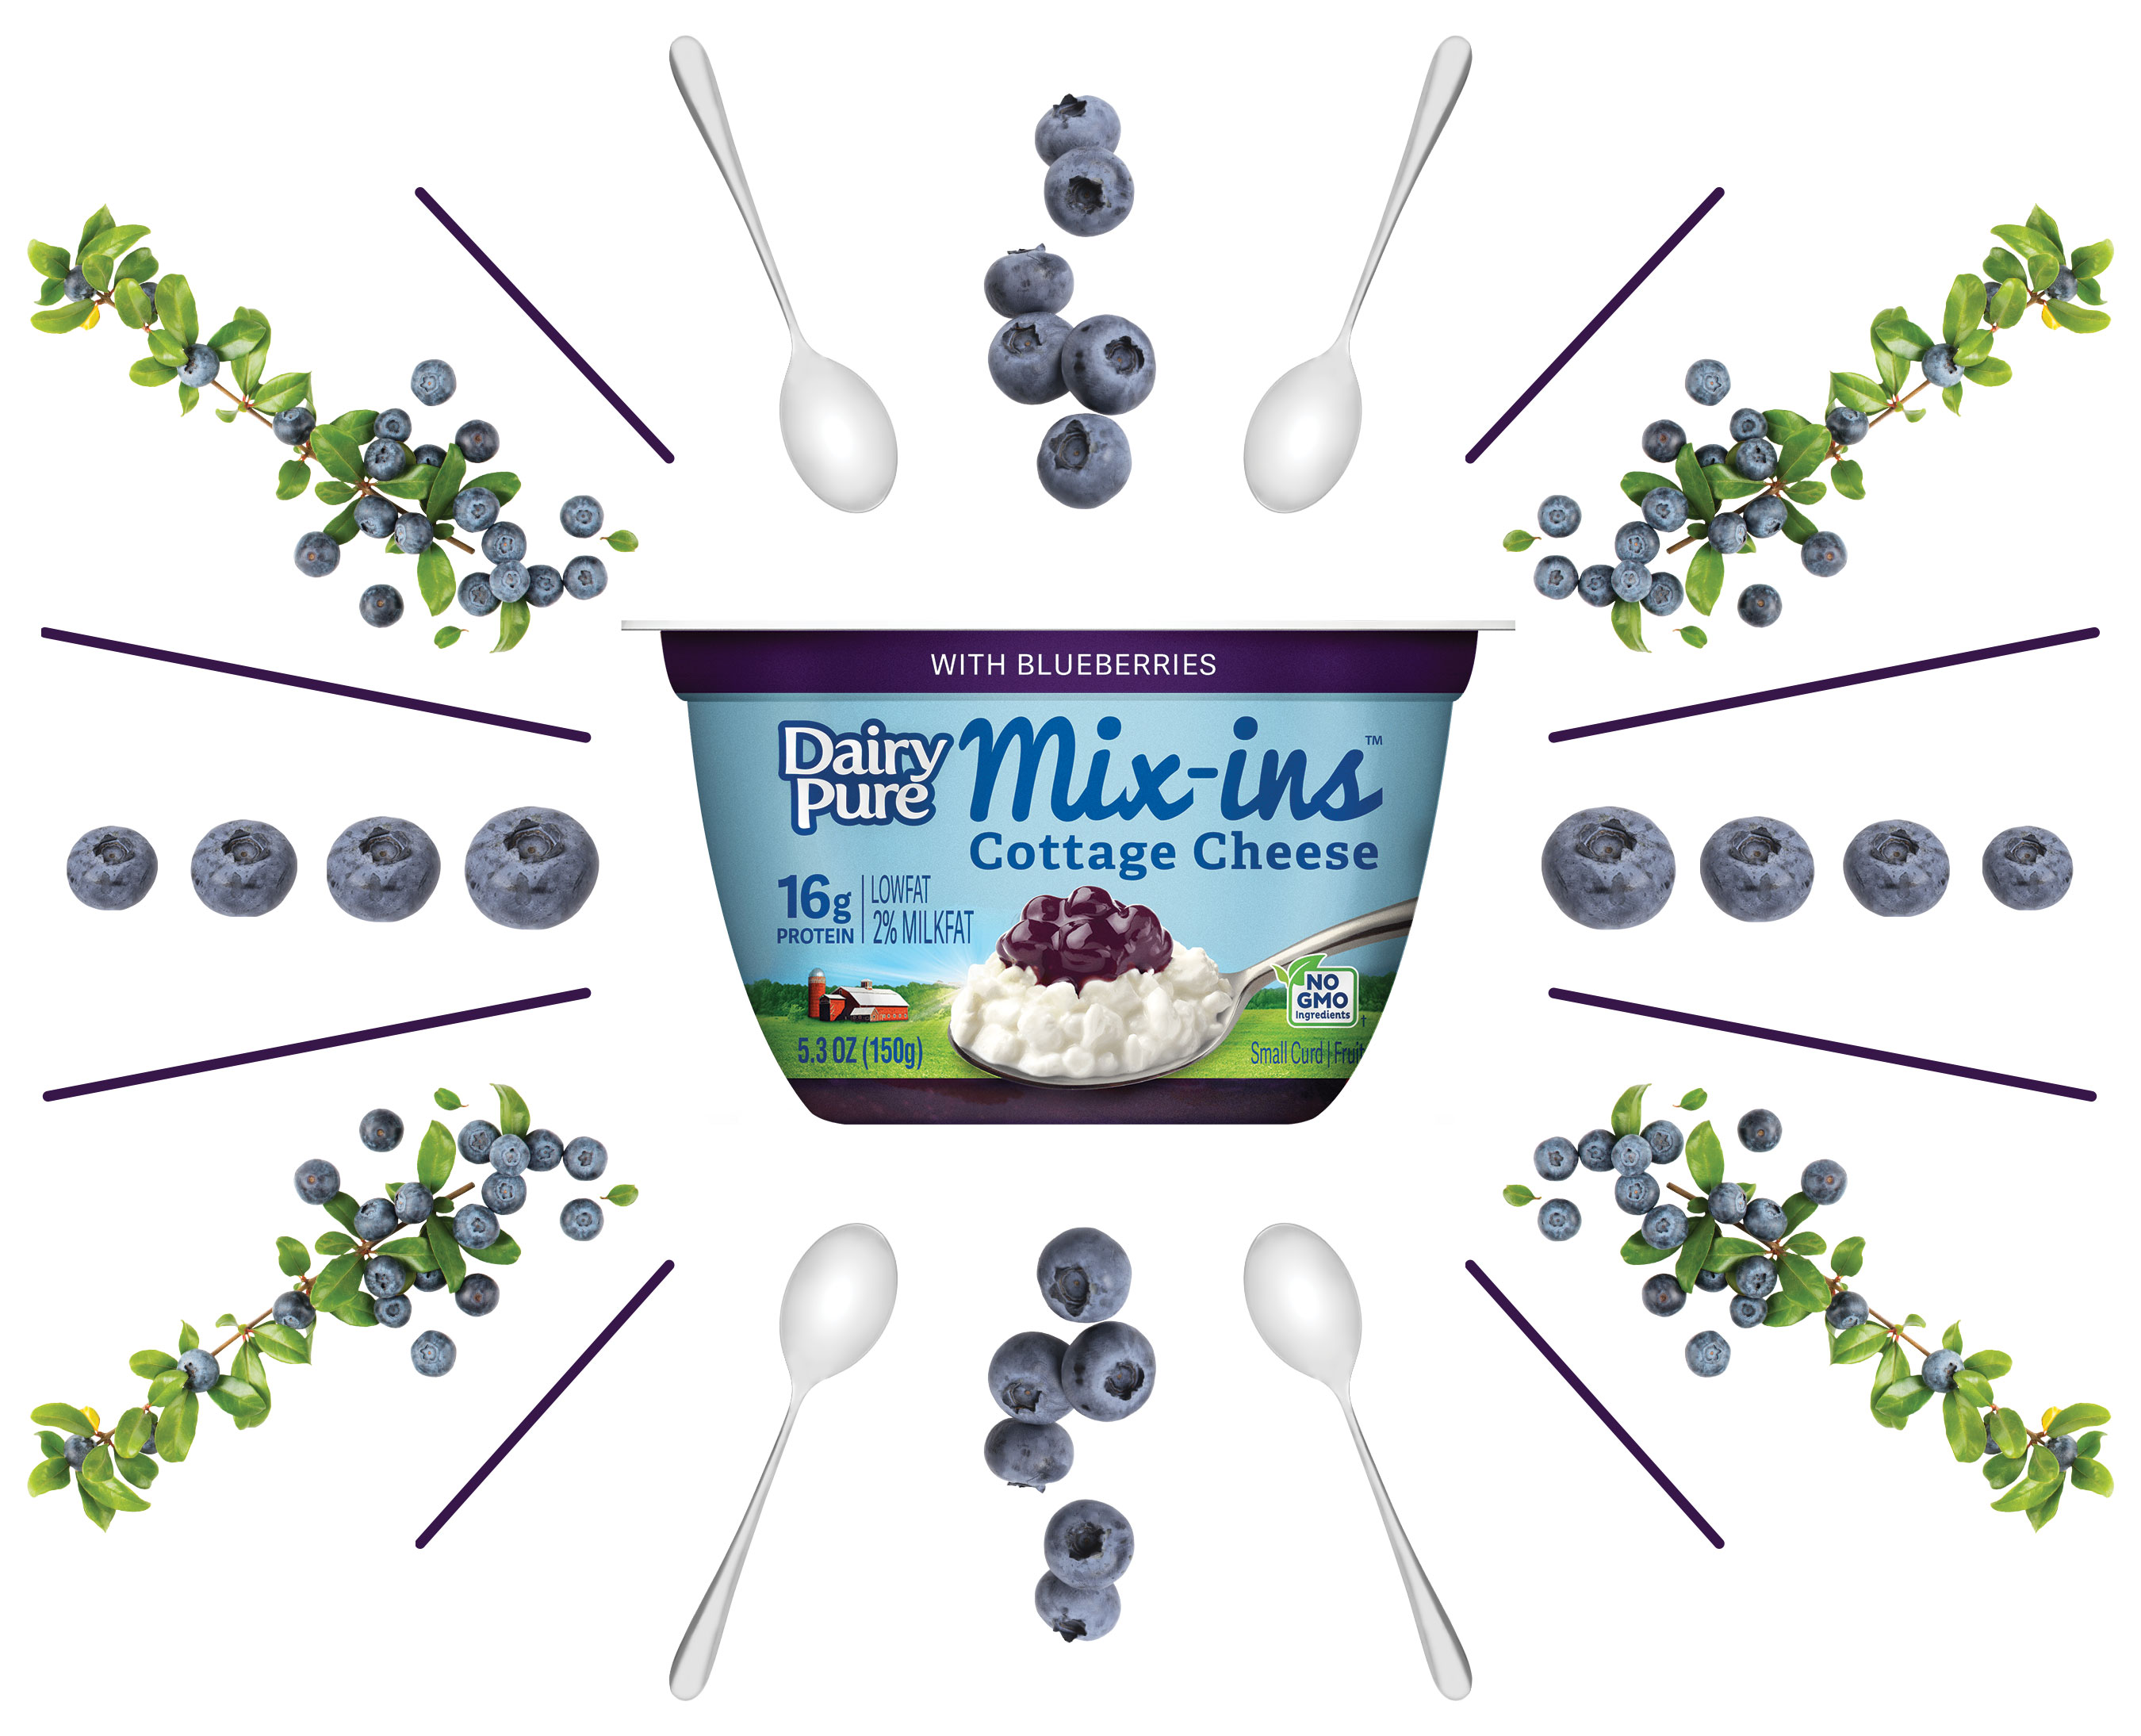 DairyPure Mix-ins Blueberry